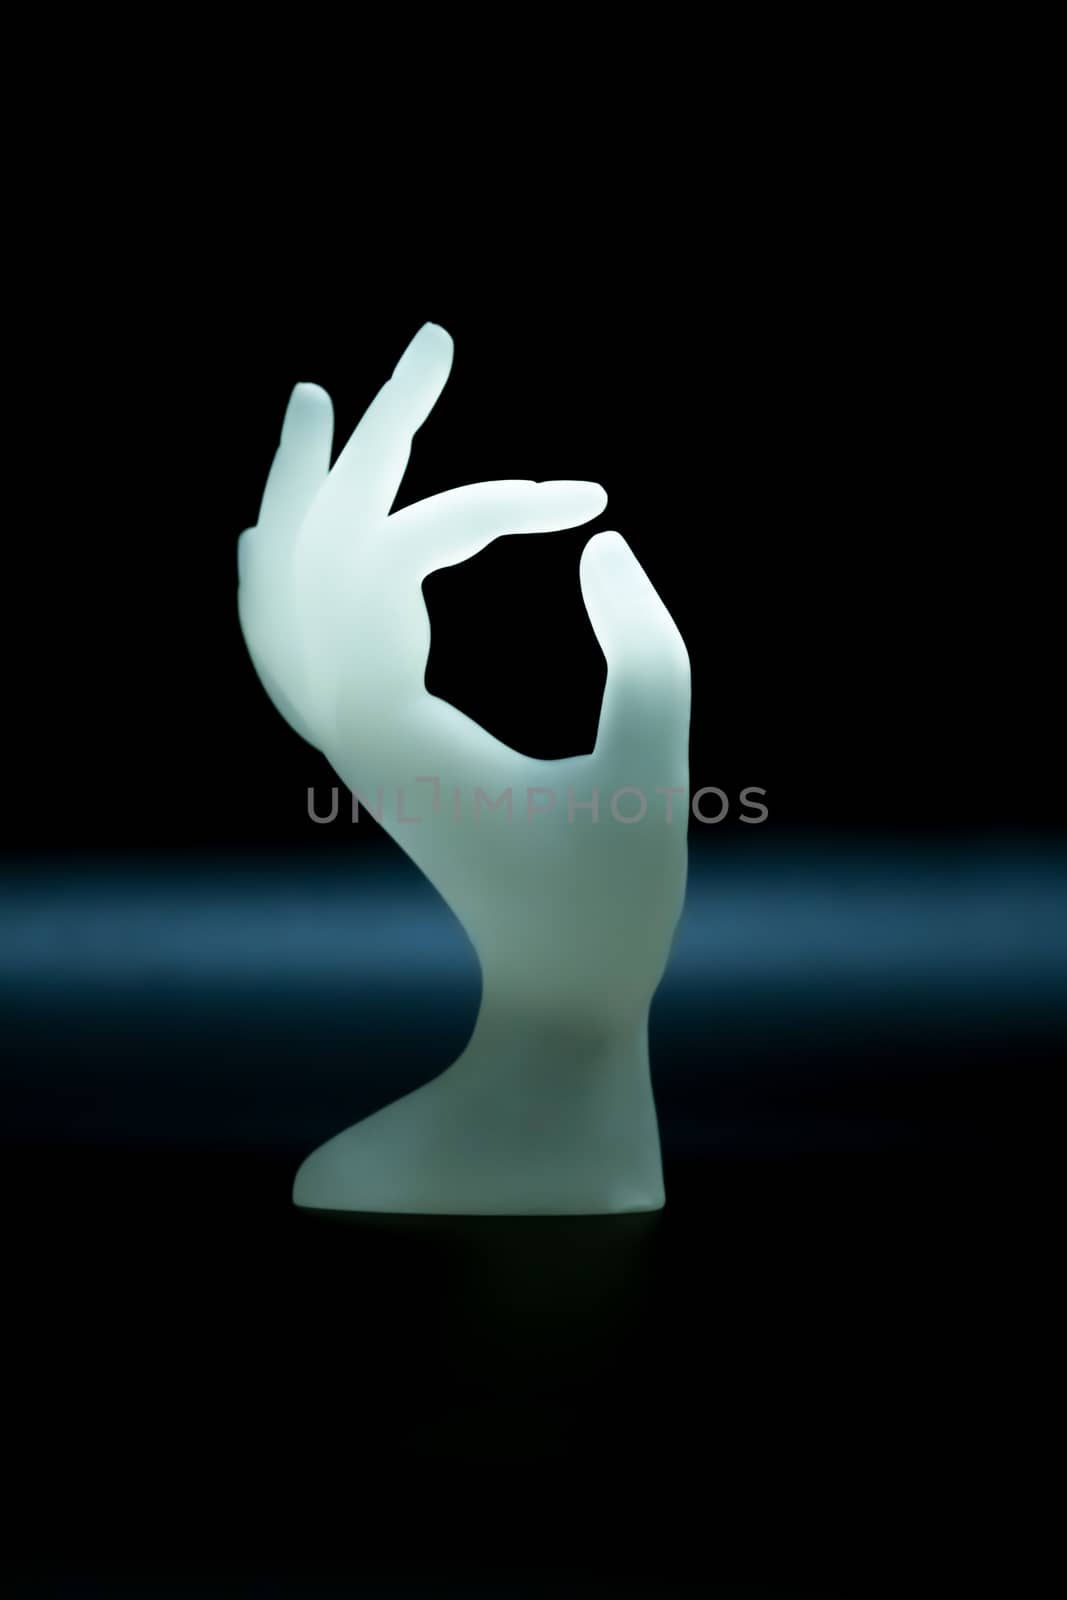 OK hand shape resin ring display holder for jewelry display on dark background use for advertising design for jewelry shop or nail salon with copy space by Fahroni